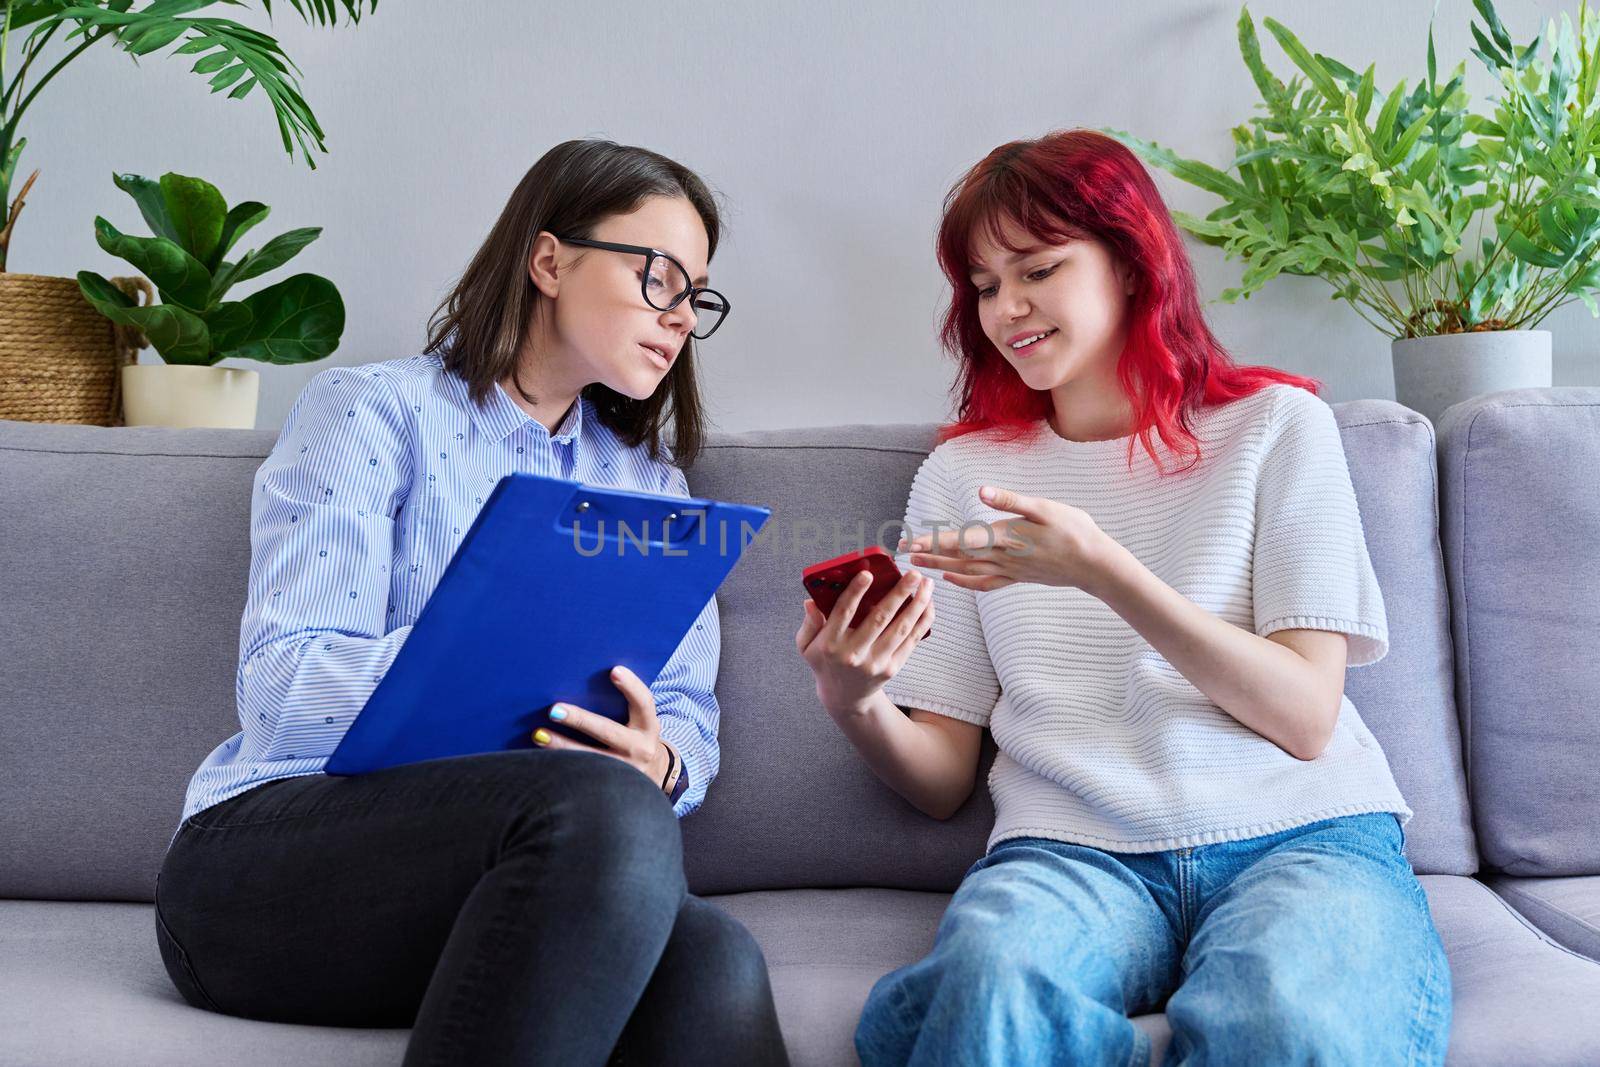 Psychologist counseling teenage female, individual therapy in doctors office. Professional counselor helping teenager, girl with smartphone. Mental health, adolescence, psychology, psychiatry concept